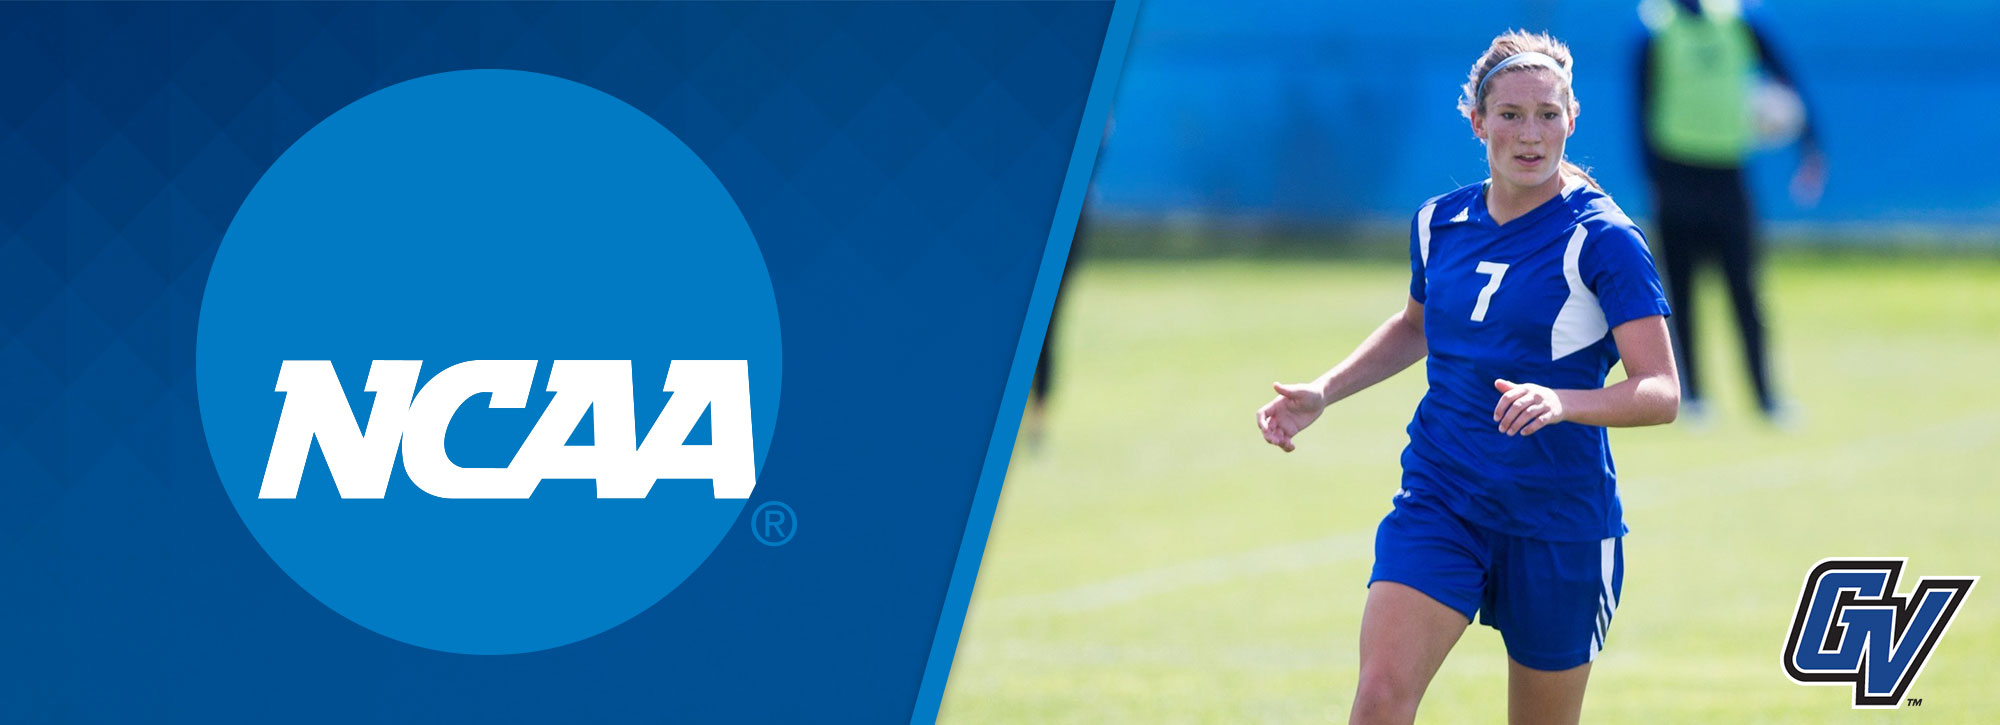 Grand Valley State's Carlson Named NCAA Woman of the Year Nominee